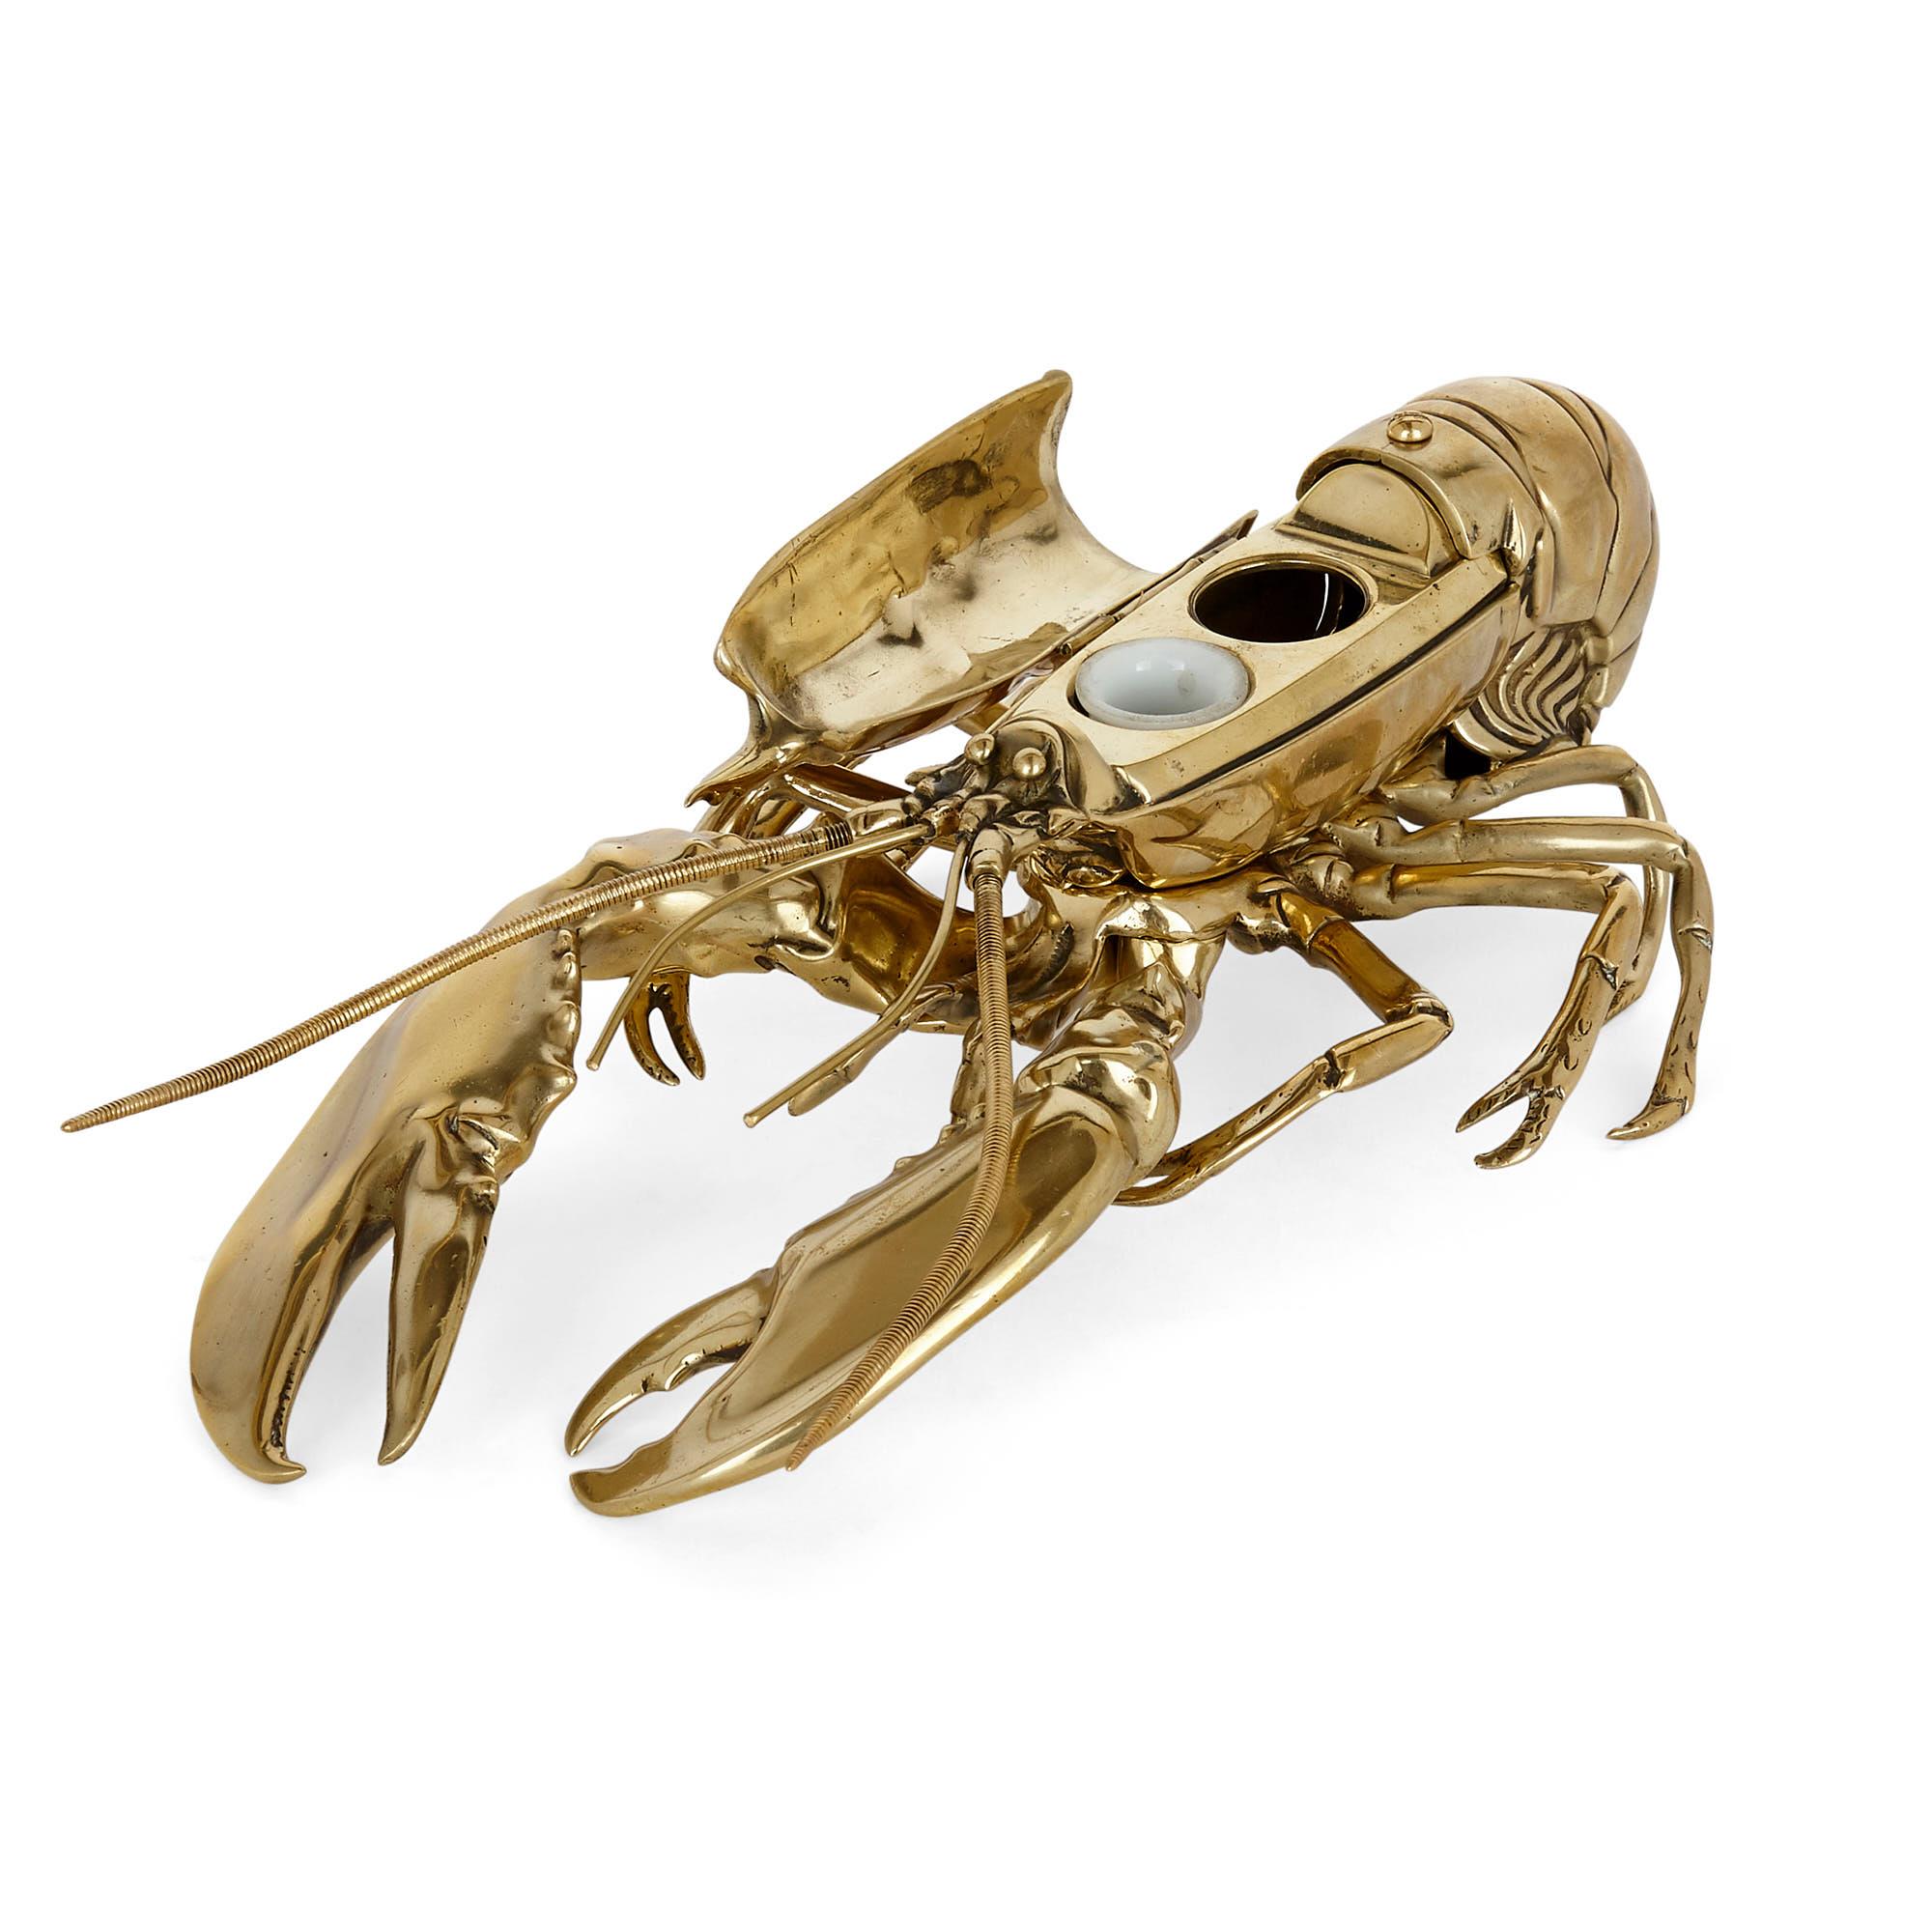 English brass inkwell in the form of a lobster
English, late 19th century
Measures: Height 9.5cm, width 17.5cm, depth 33cm

This bizarre yet charming brass inkwell takes the guise of a lobster. The lobster contains two inkwells, set beneath a